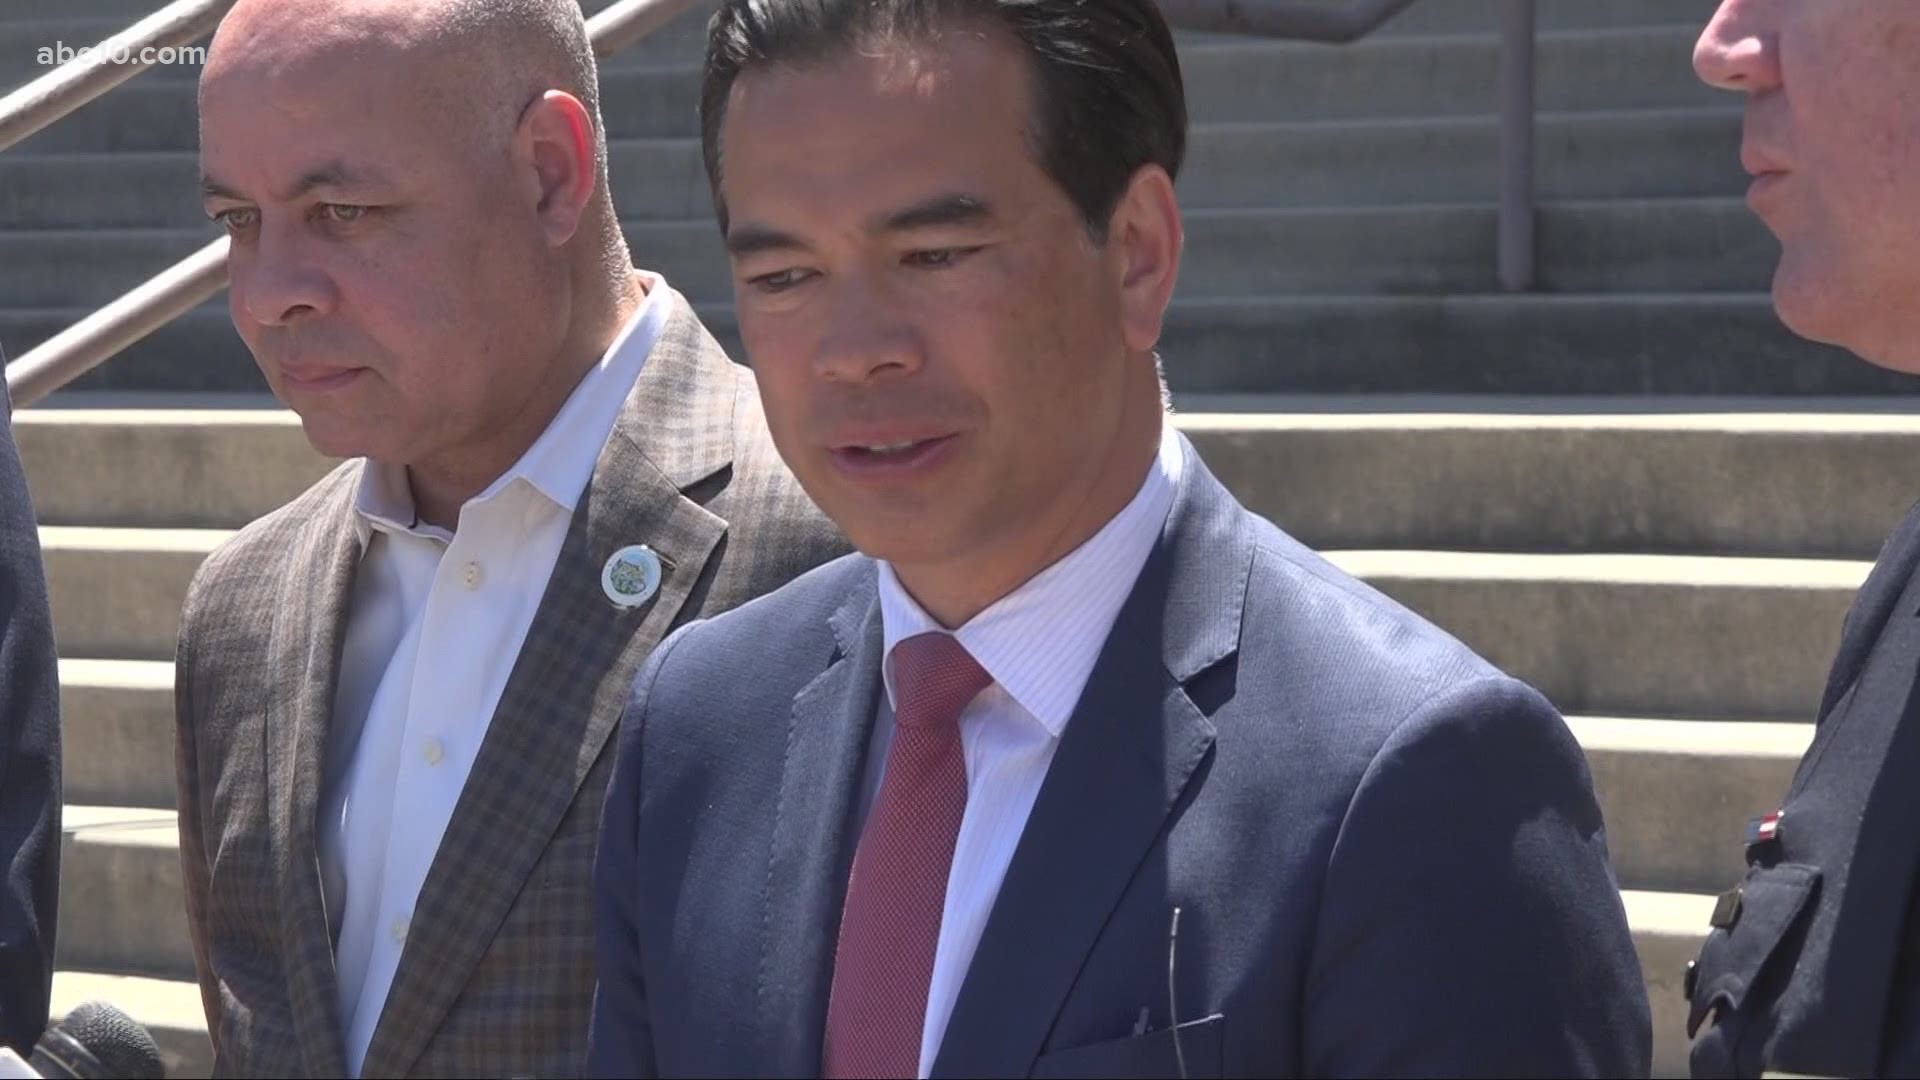 Stockton programs "prevent gun violence by giving people critical support and resources on the front end, before a tragedy occurs," AG Bonta said.